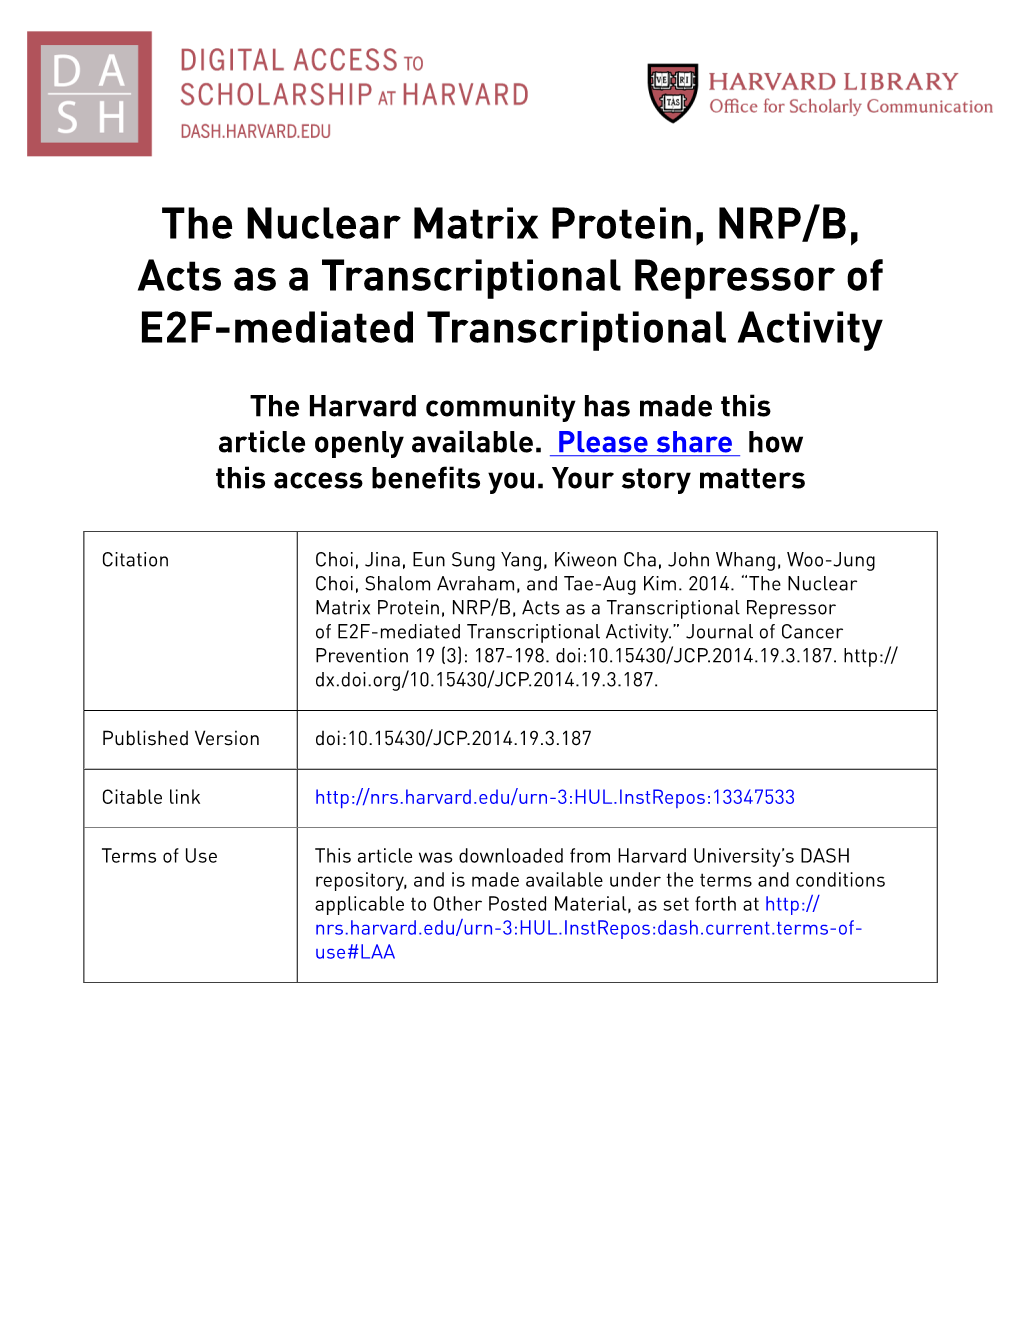 The Nuclear Matrix Protein, NRP/B, Acts As a Transcriptional Repressor of E2F-Mediated Transcriptional Activity